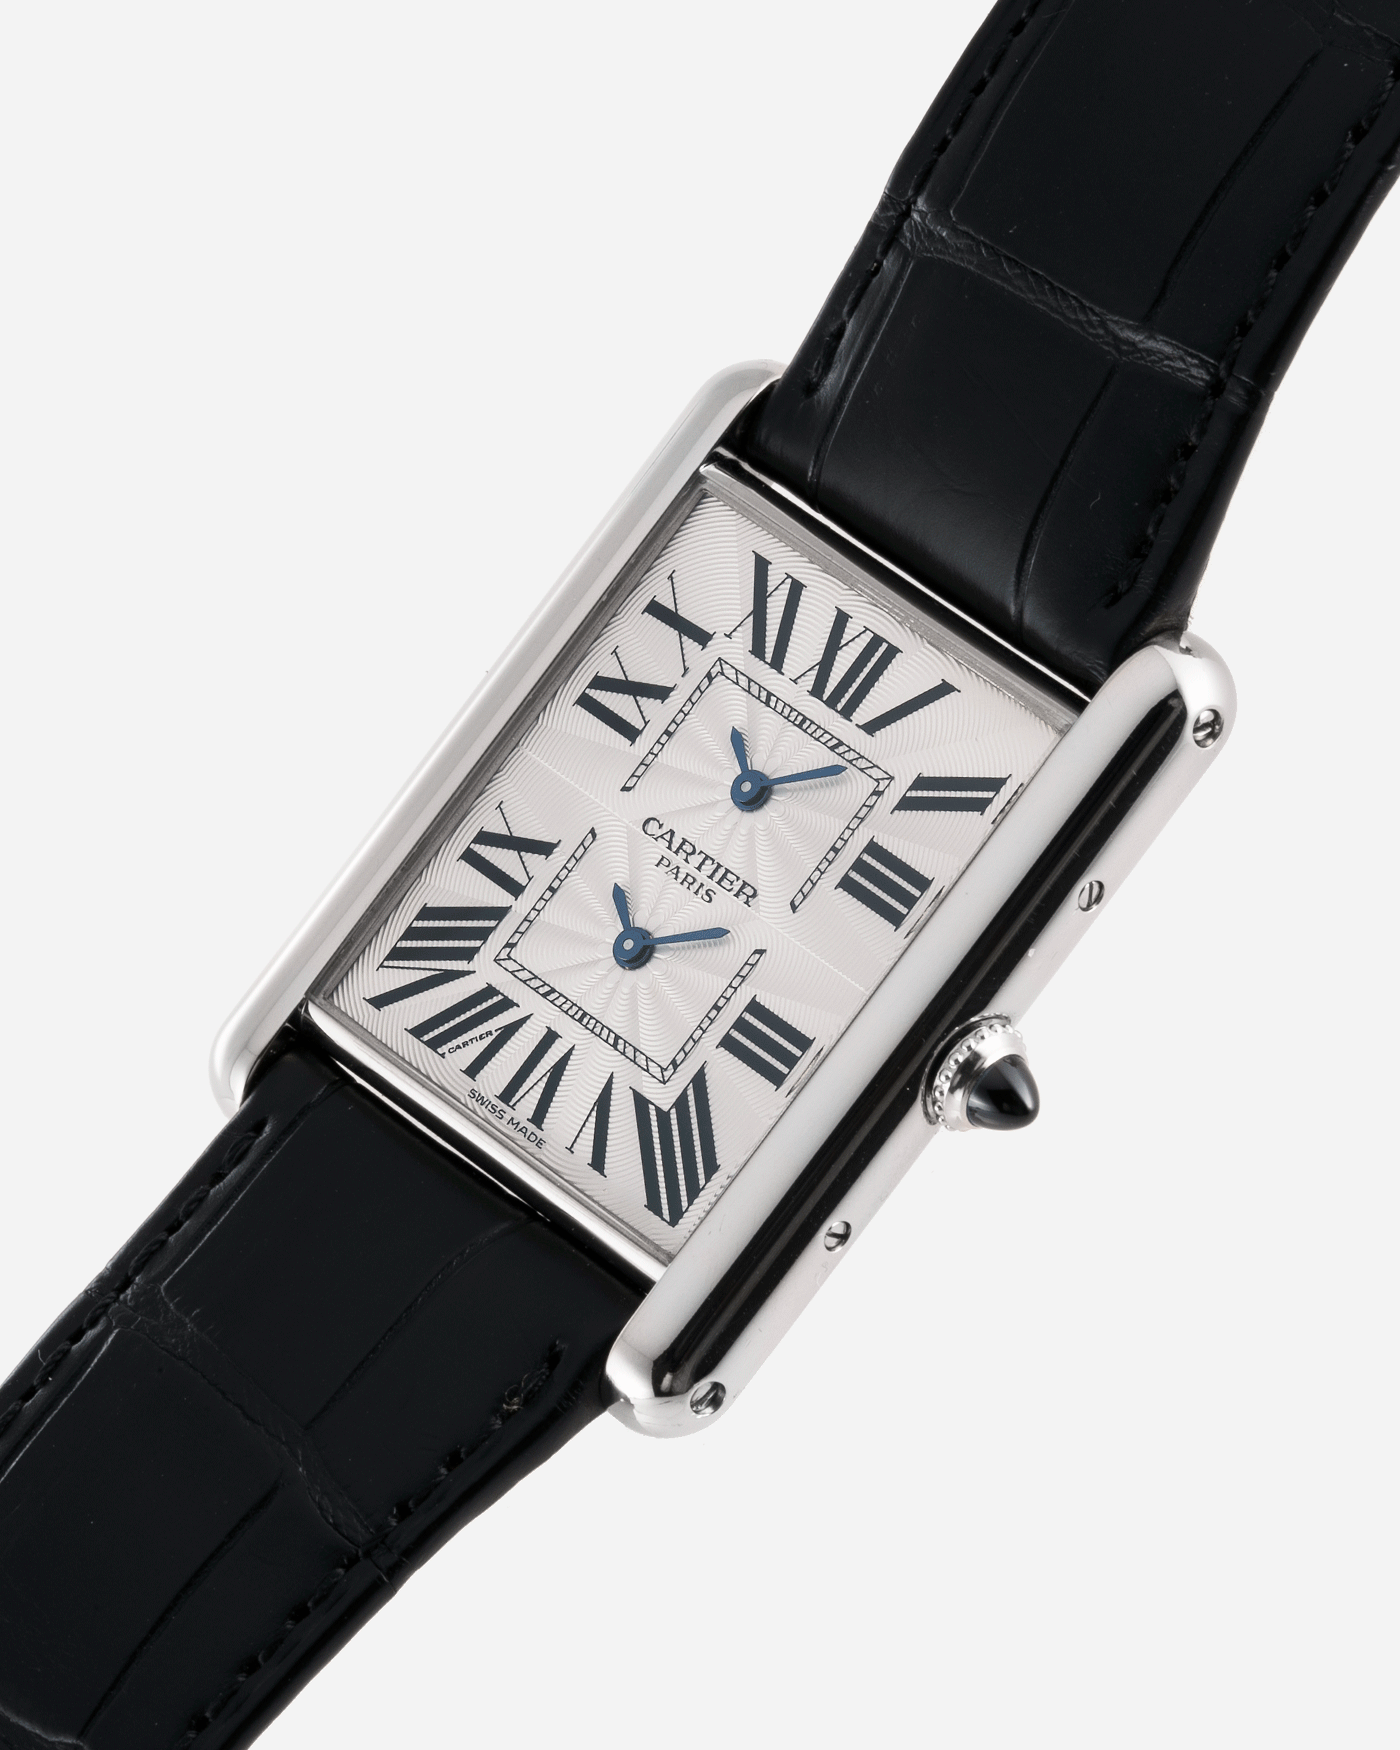 Brand: Cartier Year: 2010 Model: CPCP Tank Two Time Zone Reference: 2917 Material: 18k White Gold Movement: Piaget-Based Manually Wound Cal. 9901 MC Case Diameter: 29.3mm width, 38.3mm length Strap: Cartier Black Alligator Strap with 18k White Gold Cartier Deployant Clasp